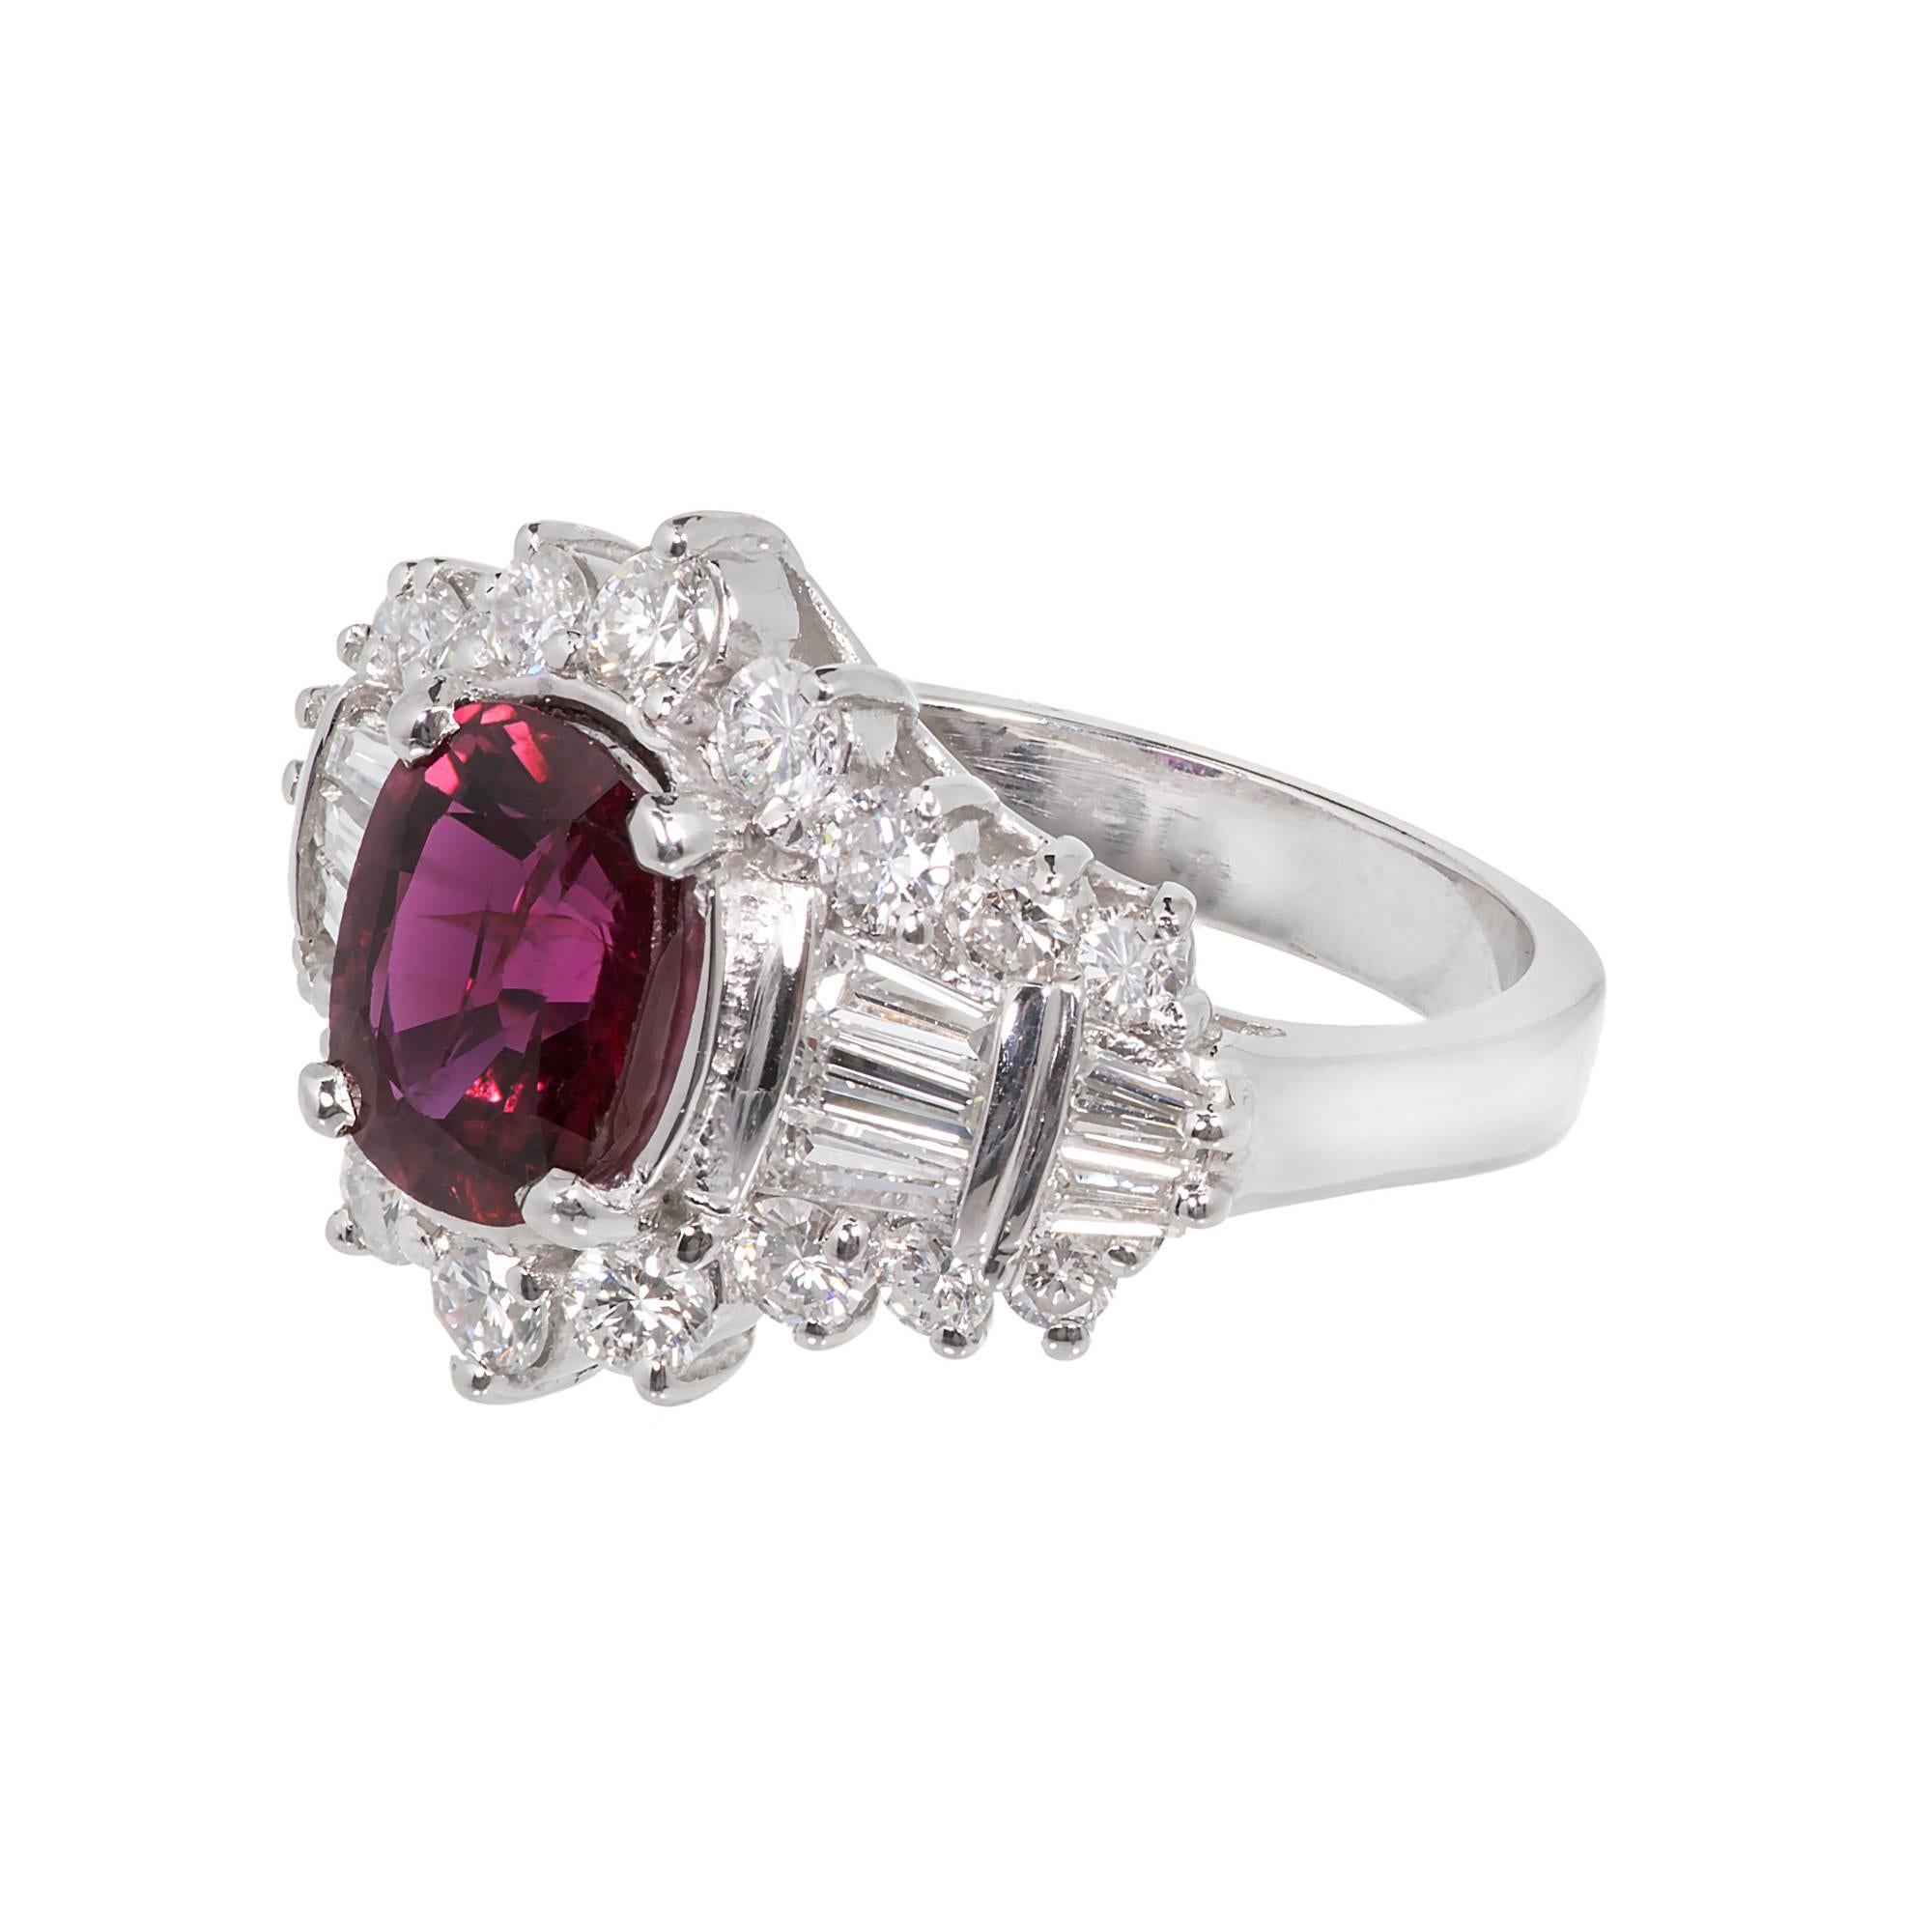 Vintage 1960 top gem red Ruby and diamond ring. In a platinum setting.  GIA certified heated with minor residue only. Fine bright baguette and round diamonds.

1 oval gem red Ruby, approx. total weight 2.30cts, heated, simple heat only, minor